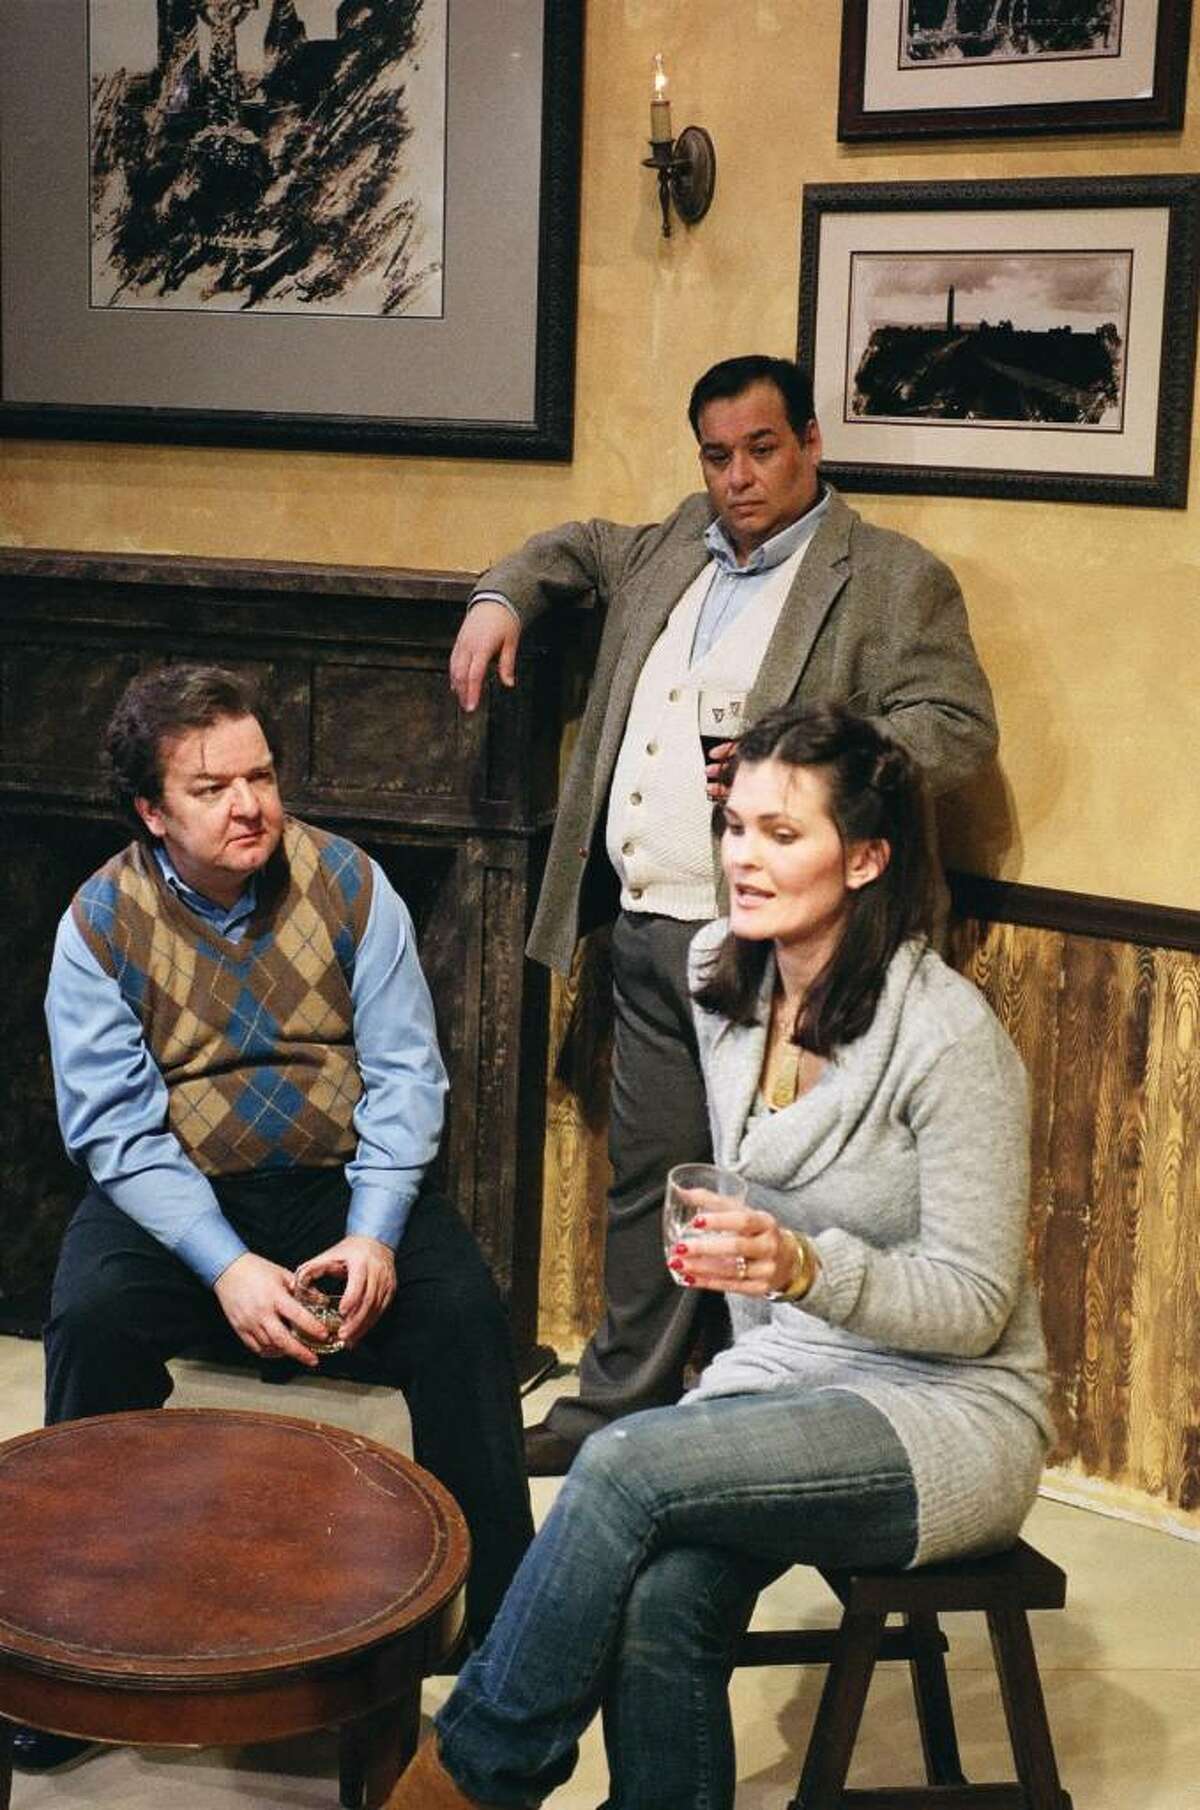 Jimmy (Tom Rushen) and Finbar (Stephen DiRocco) listen as Valerie (Linda Branch Moran) tells her story in the Town Players of New Canaan’s production of Conor McPherson’s award winning drama THE WEIR.